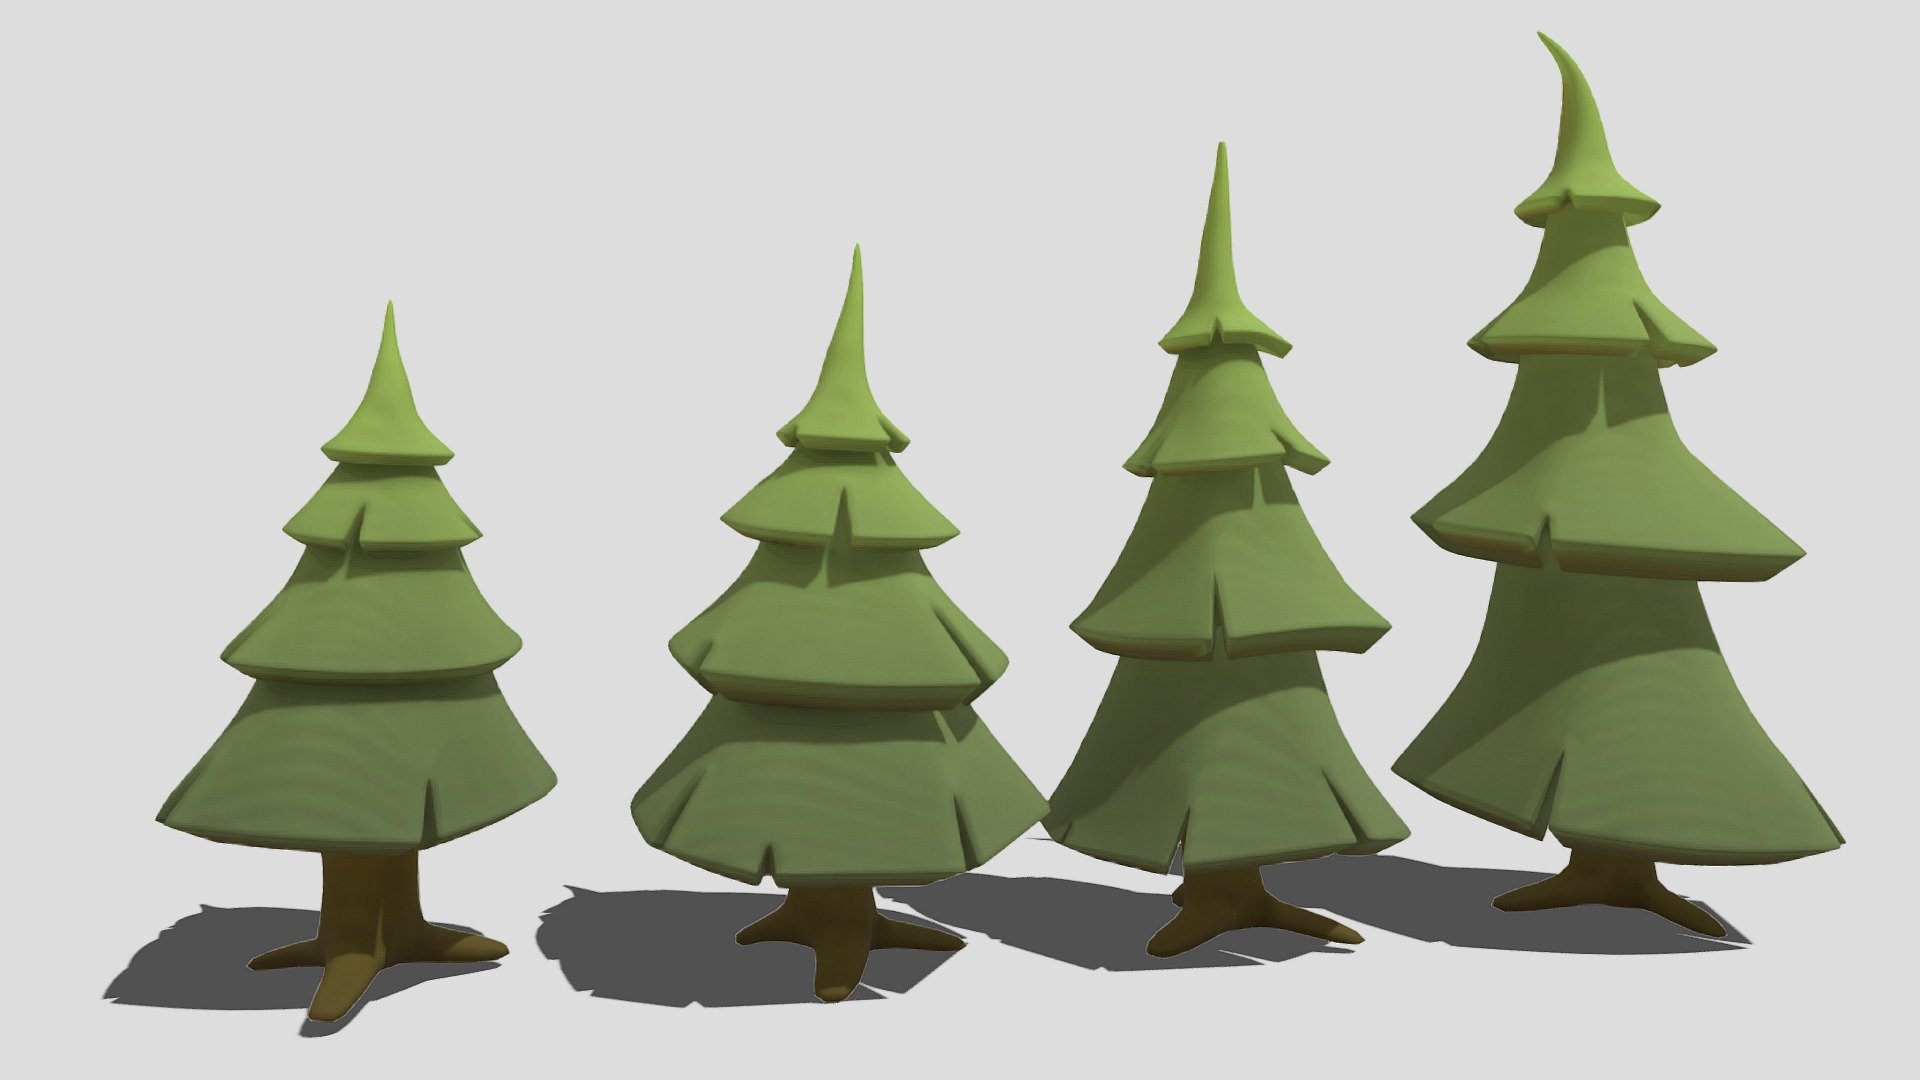 set of 4 low poly pine trees while testing out low poly designs and methods with Maya - Pines - 3D model by Studio Lab (@studiolab.dev) 3d model